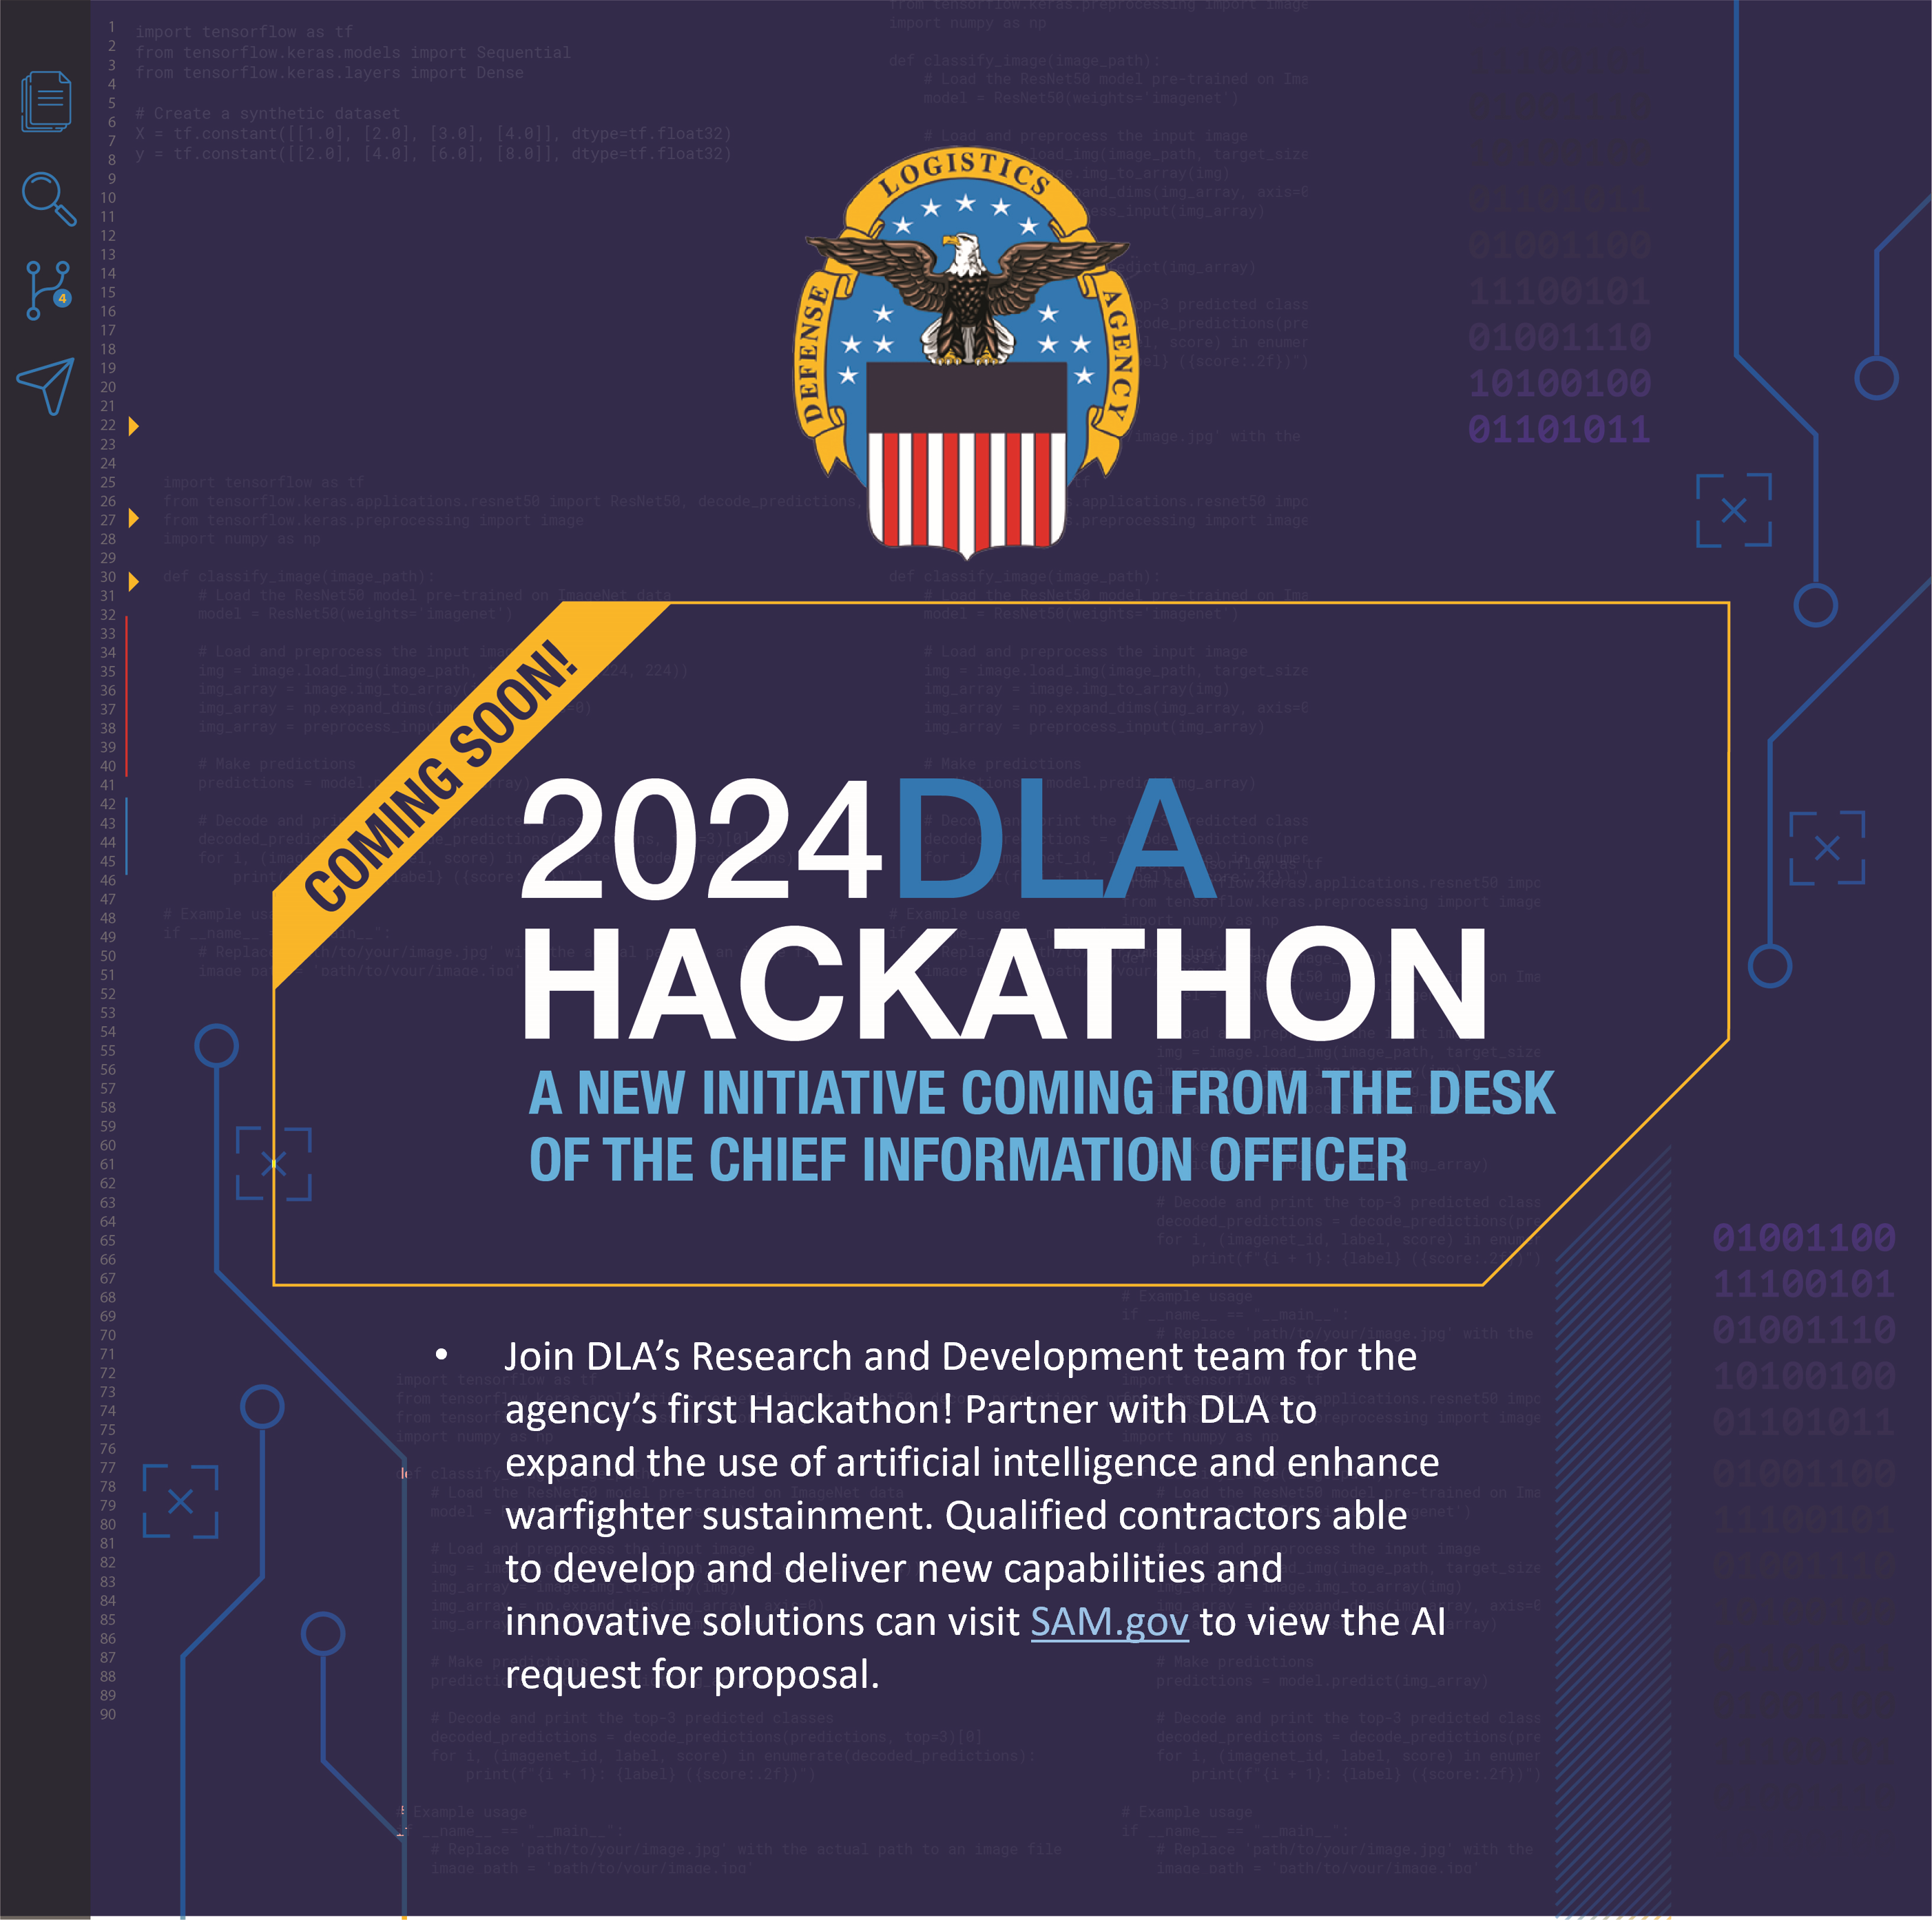 Abstract poster for the 2024 DLA Hackathon